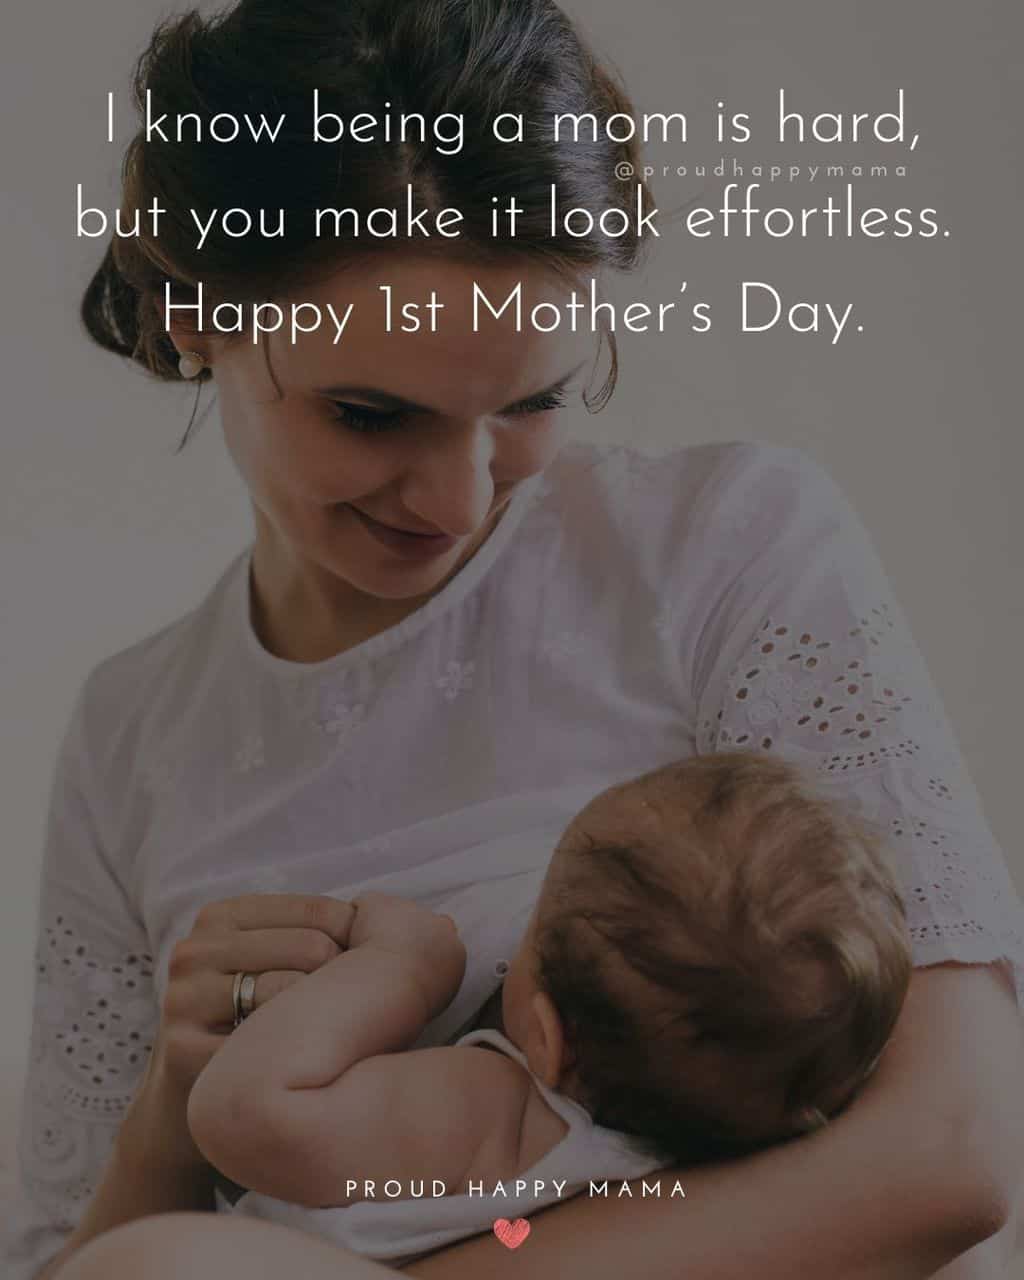 First Mothers Day Quotes - I know being a mom is hard, but you make it look effortless. Happy 1st Mother’s Day.’